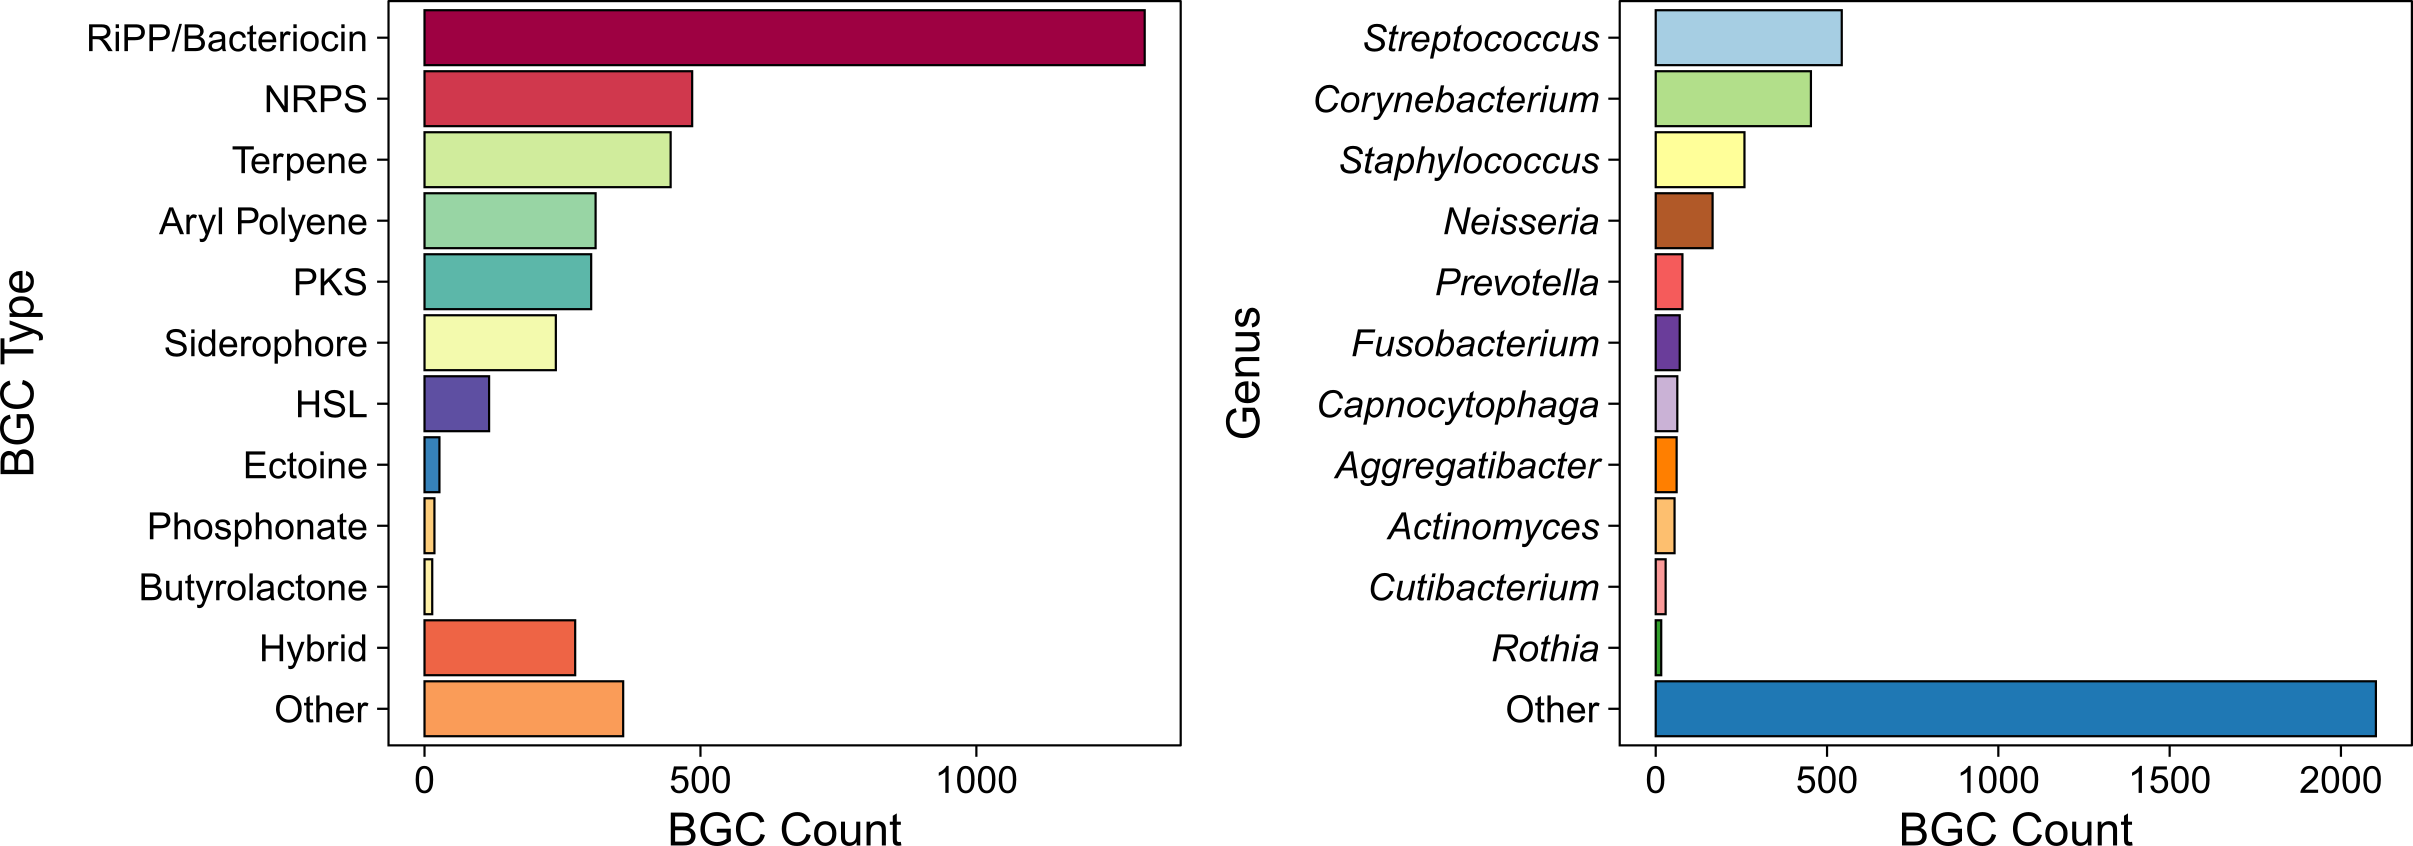 Graphs showing counts of different kinds of BGCs identified from aerodigestive tract bacteria and the types of bacteria that encode them